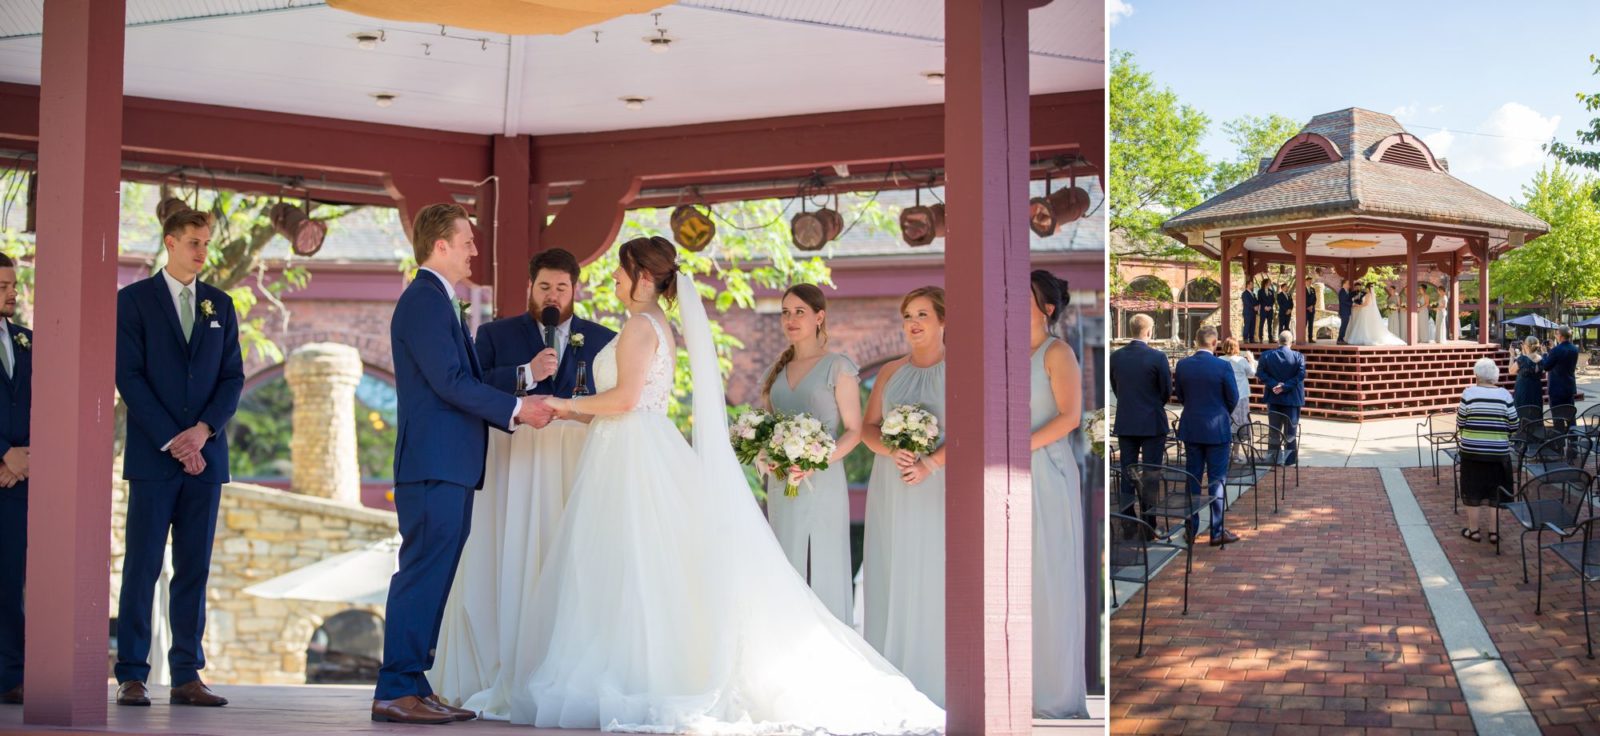 Bride and groom exchange vows at their outdoor wedding ceremony